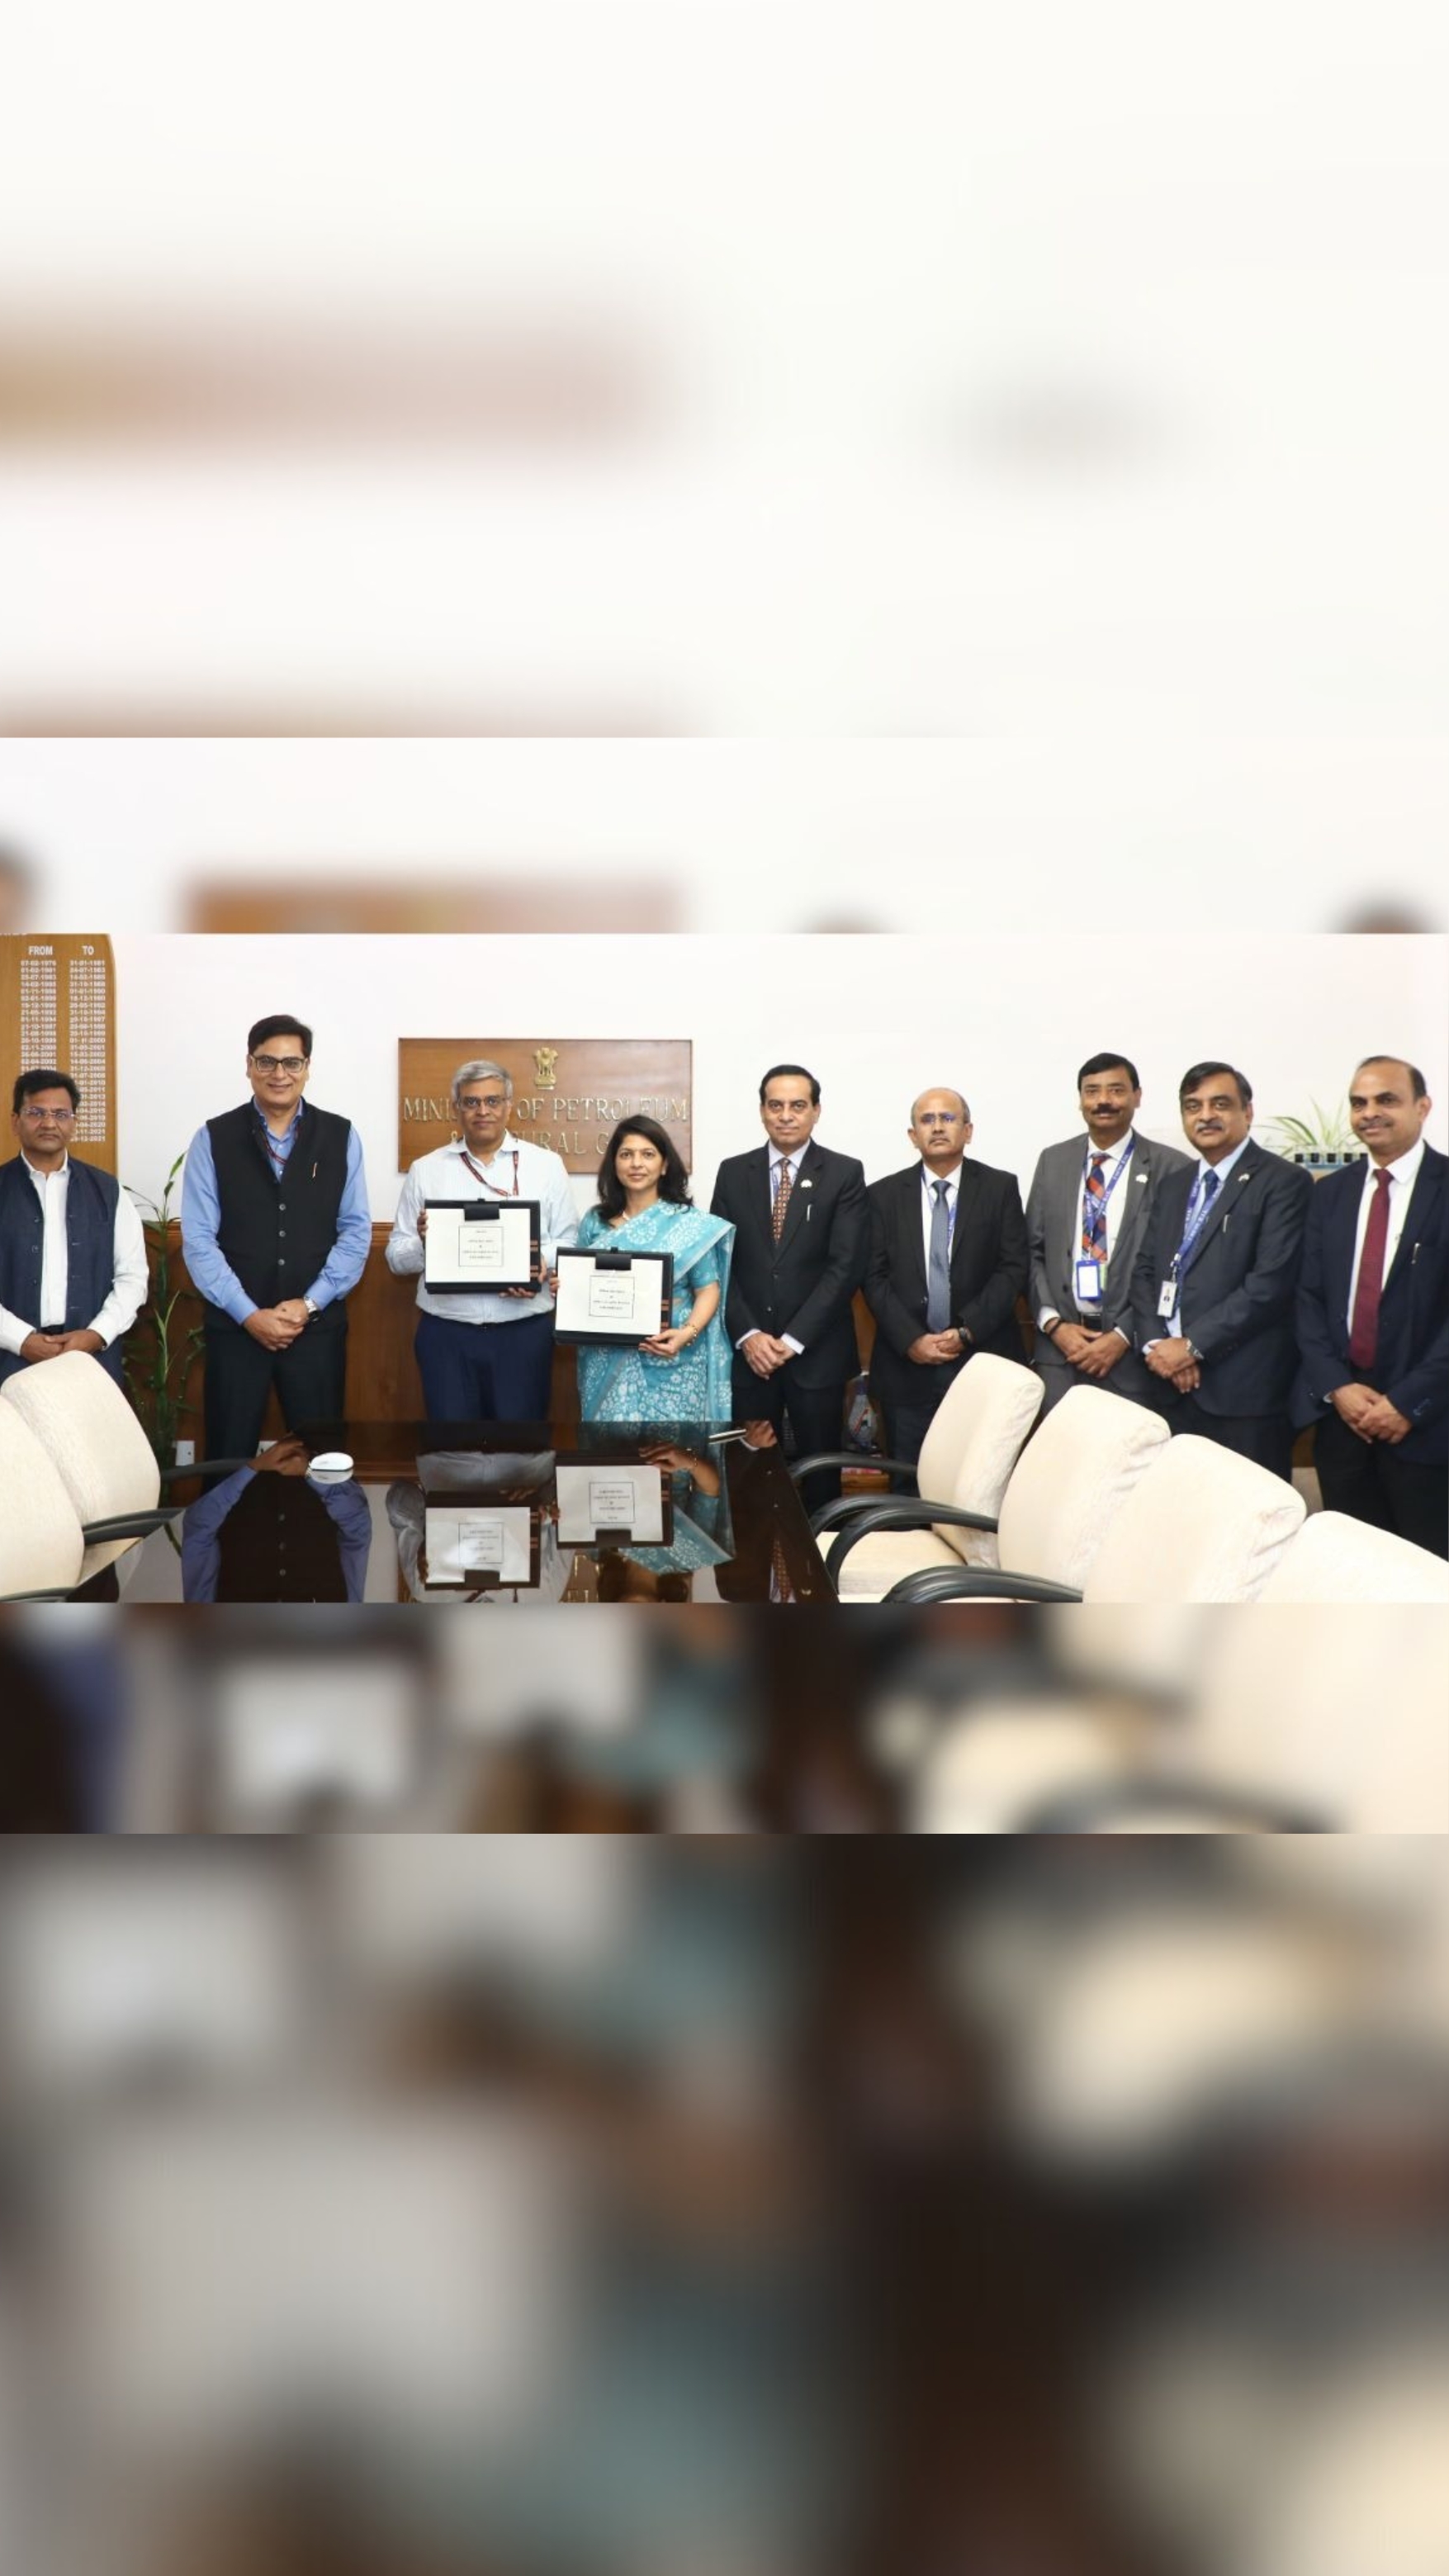 EIL – Global Engineering Consultancy signs MoU with Ministry

